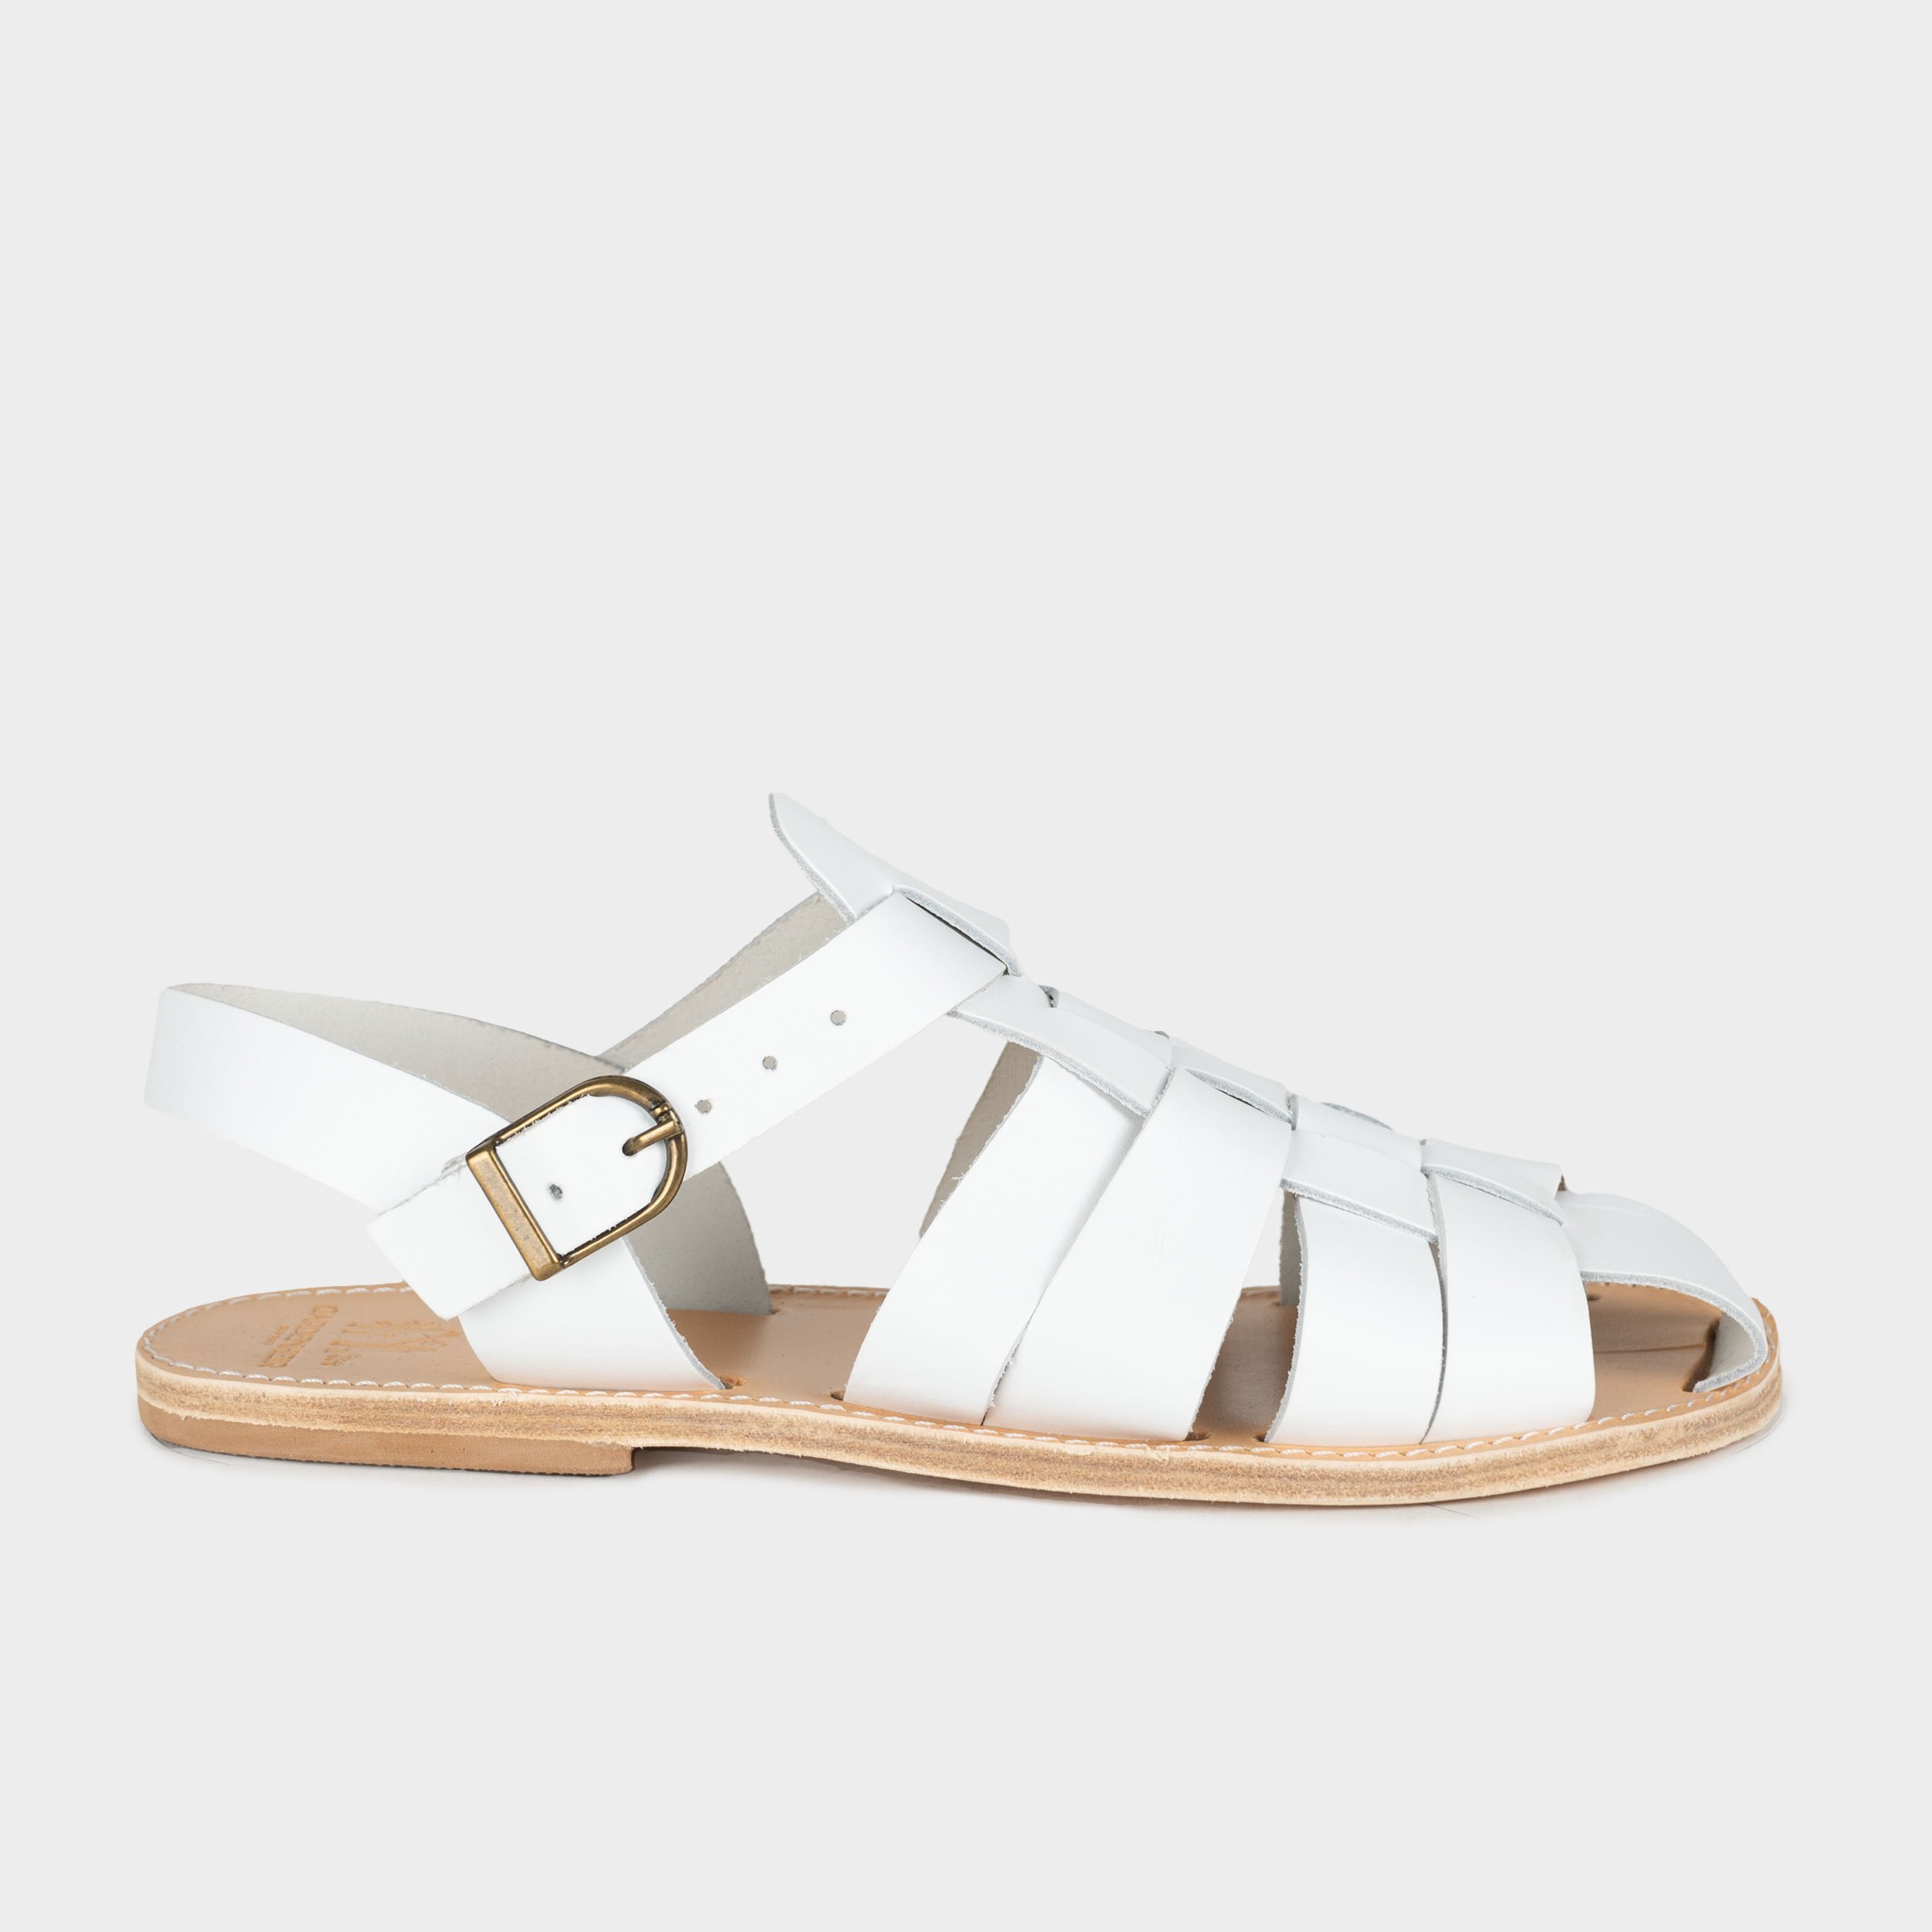 Leather Fisherman Sandals, French Fisherman Sandals, White Leather ...